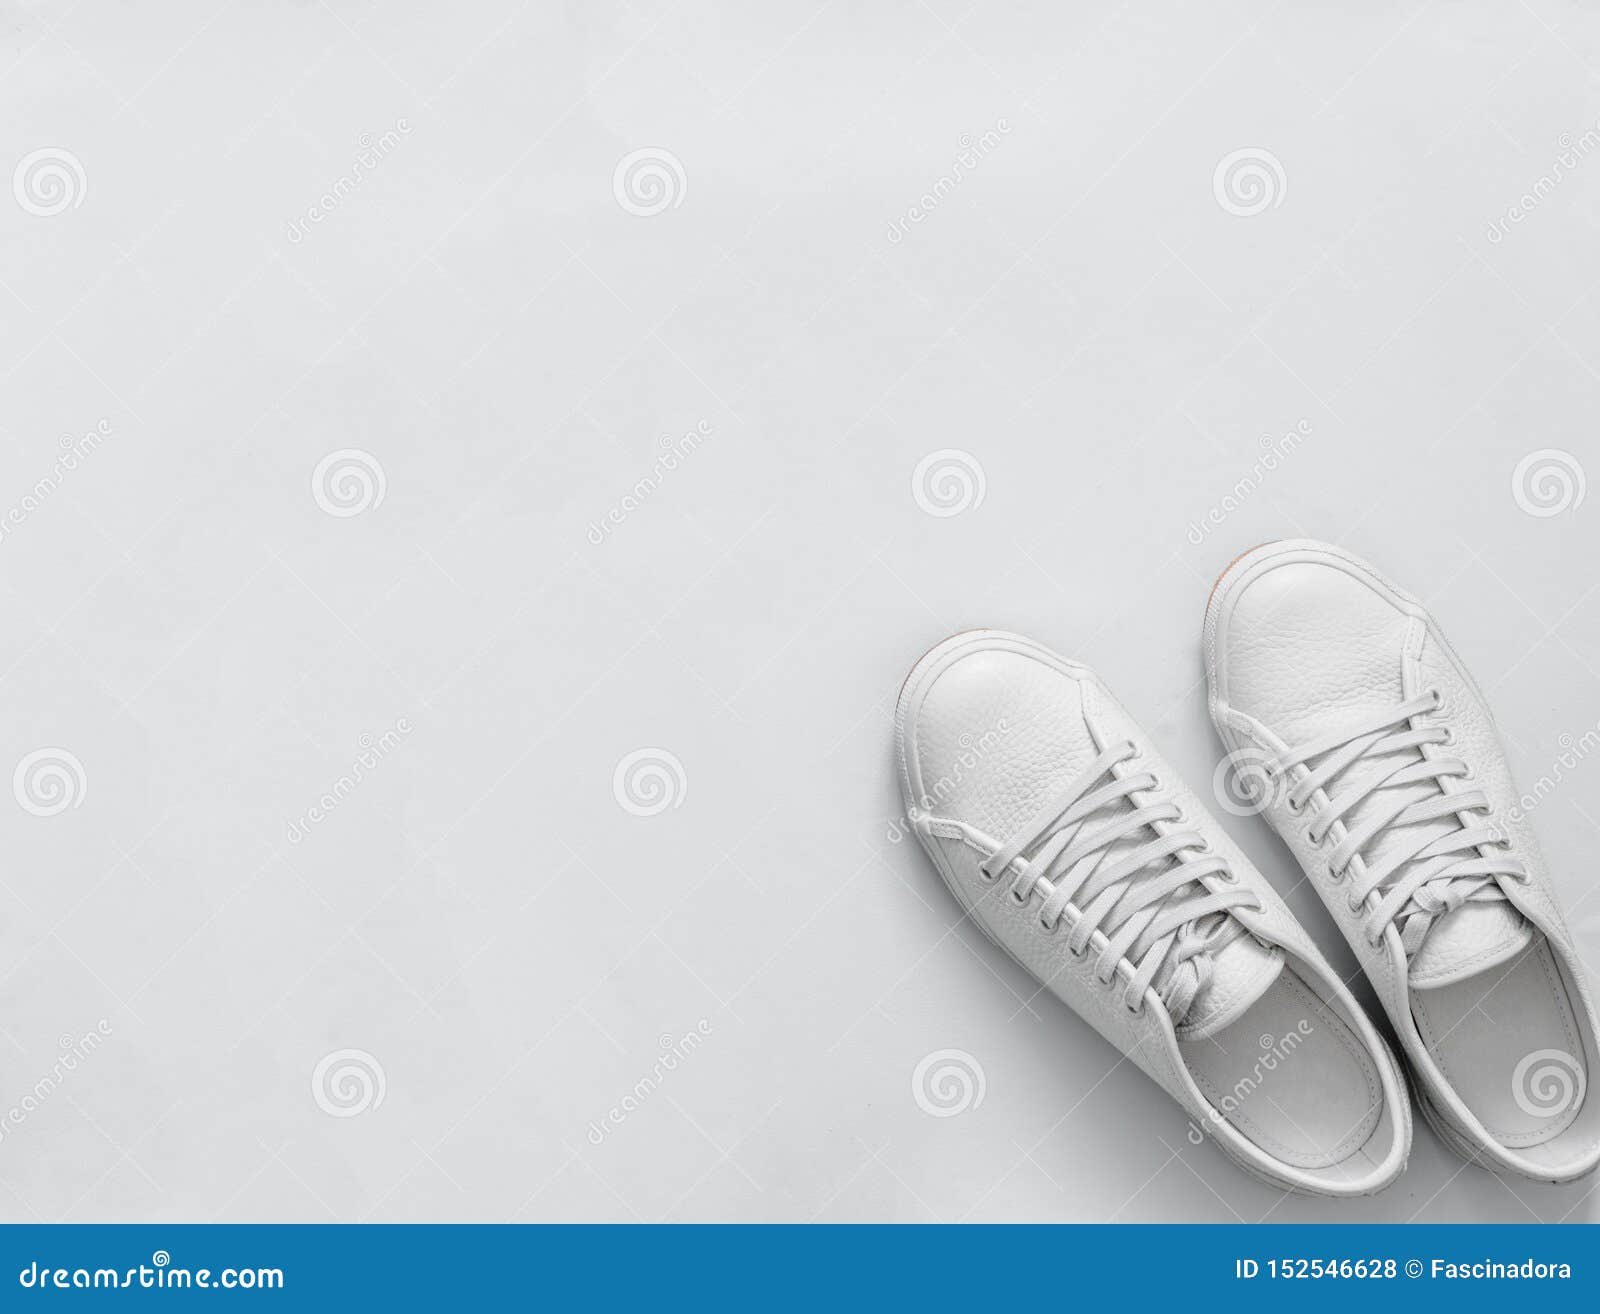 White Sneakers On Light Background, Copy Space Stock Photo - Image of ...